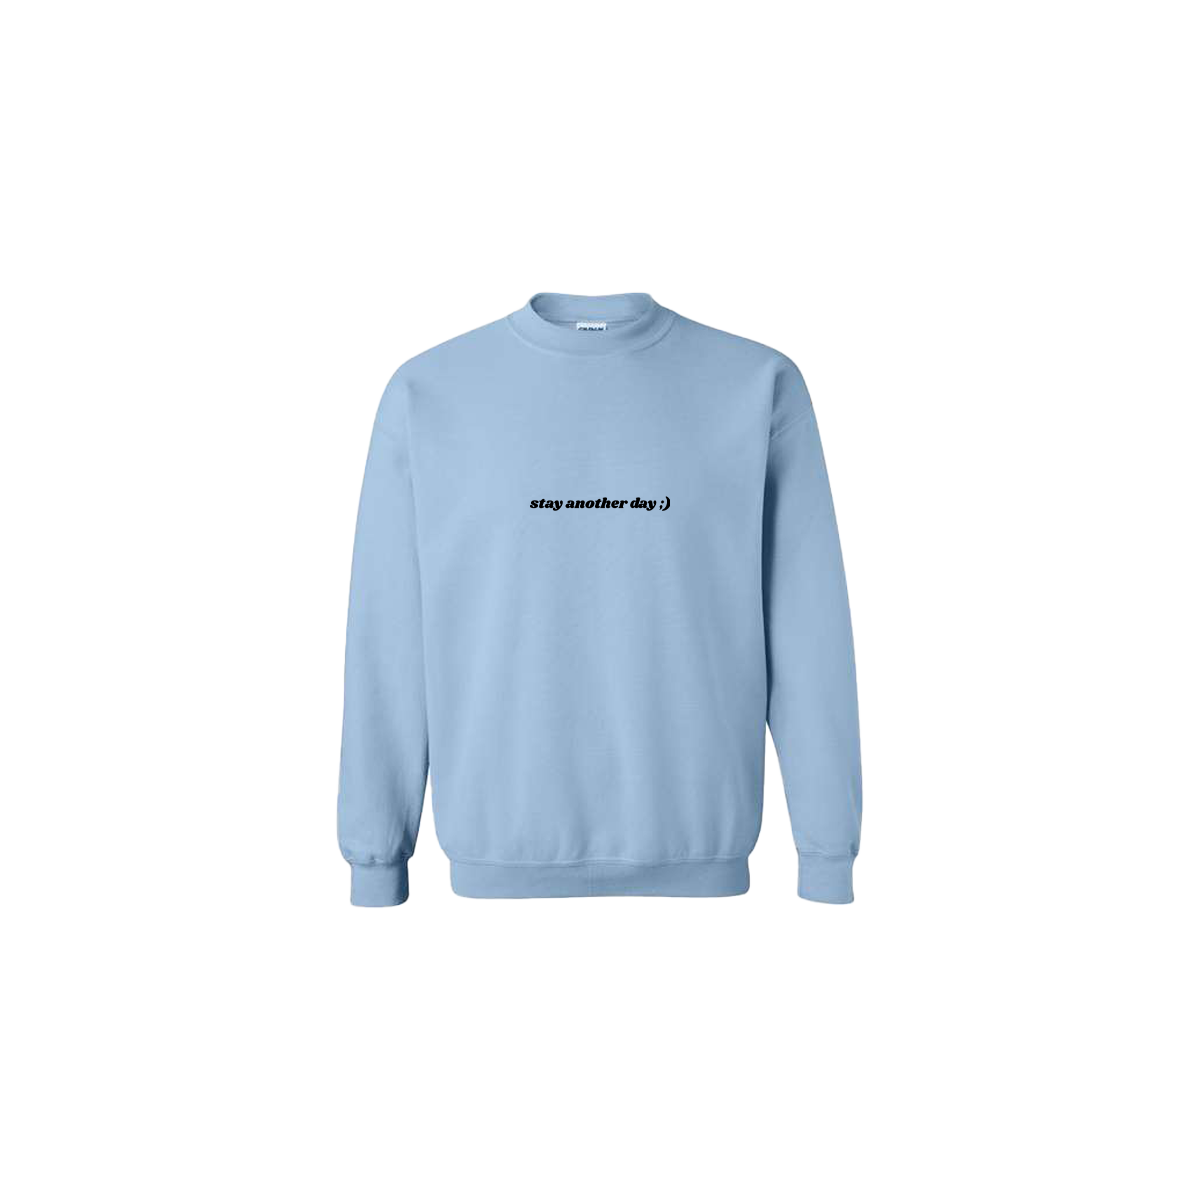 Stay Another Day Embroidered Light Blue Crewneck - Mental Health Awareness Clothing